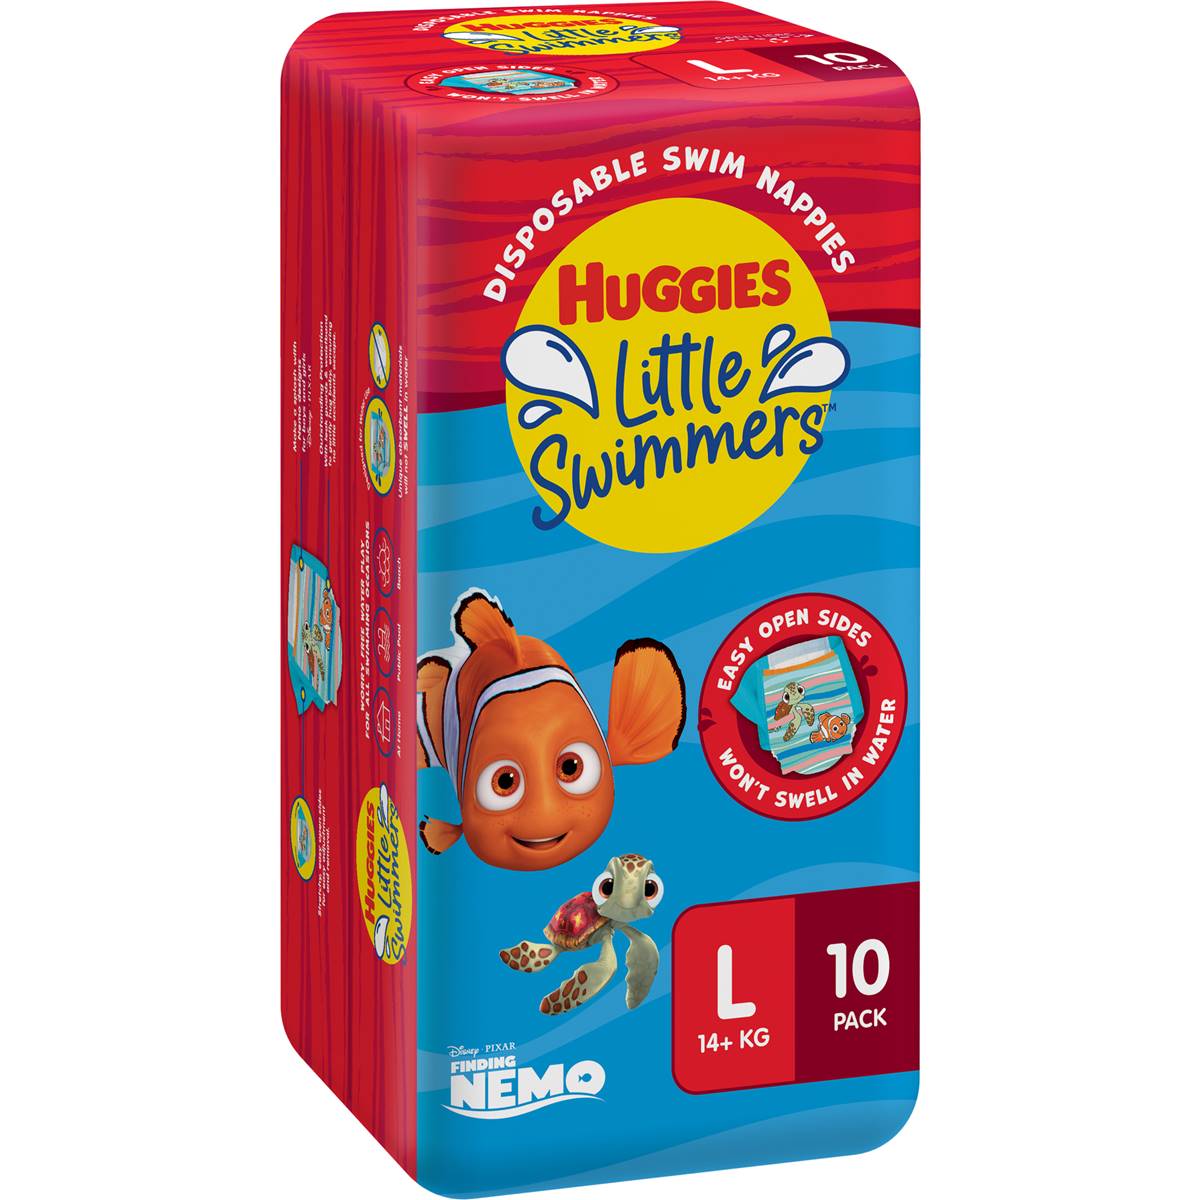 Huggies Little Swimmers Disposable Swim Nappies Large (14+kg) 10 Pack